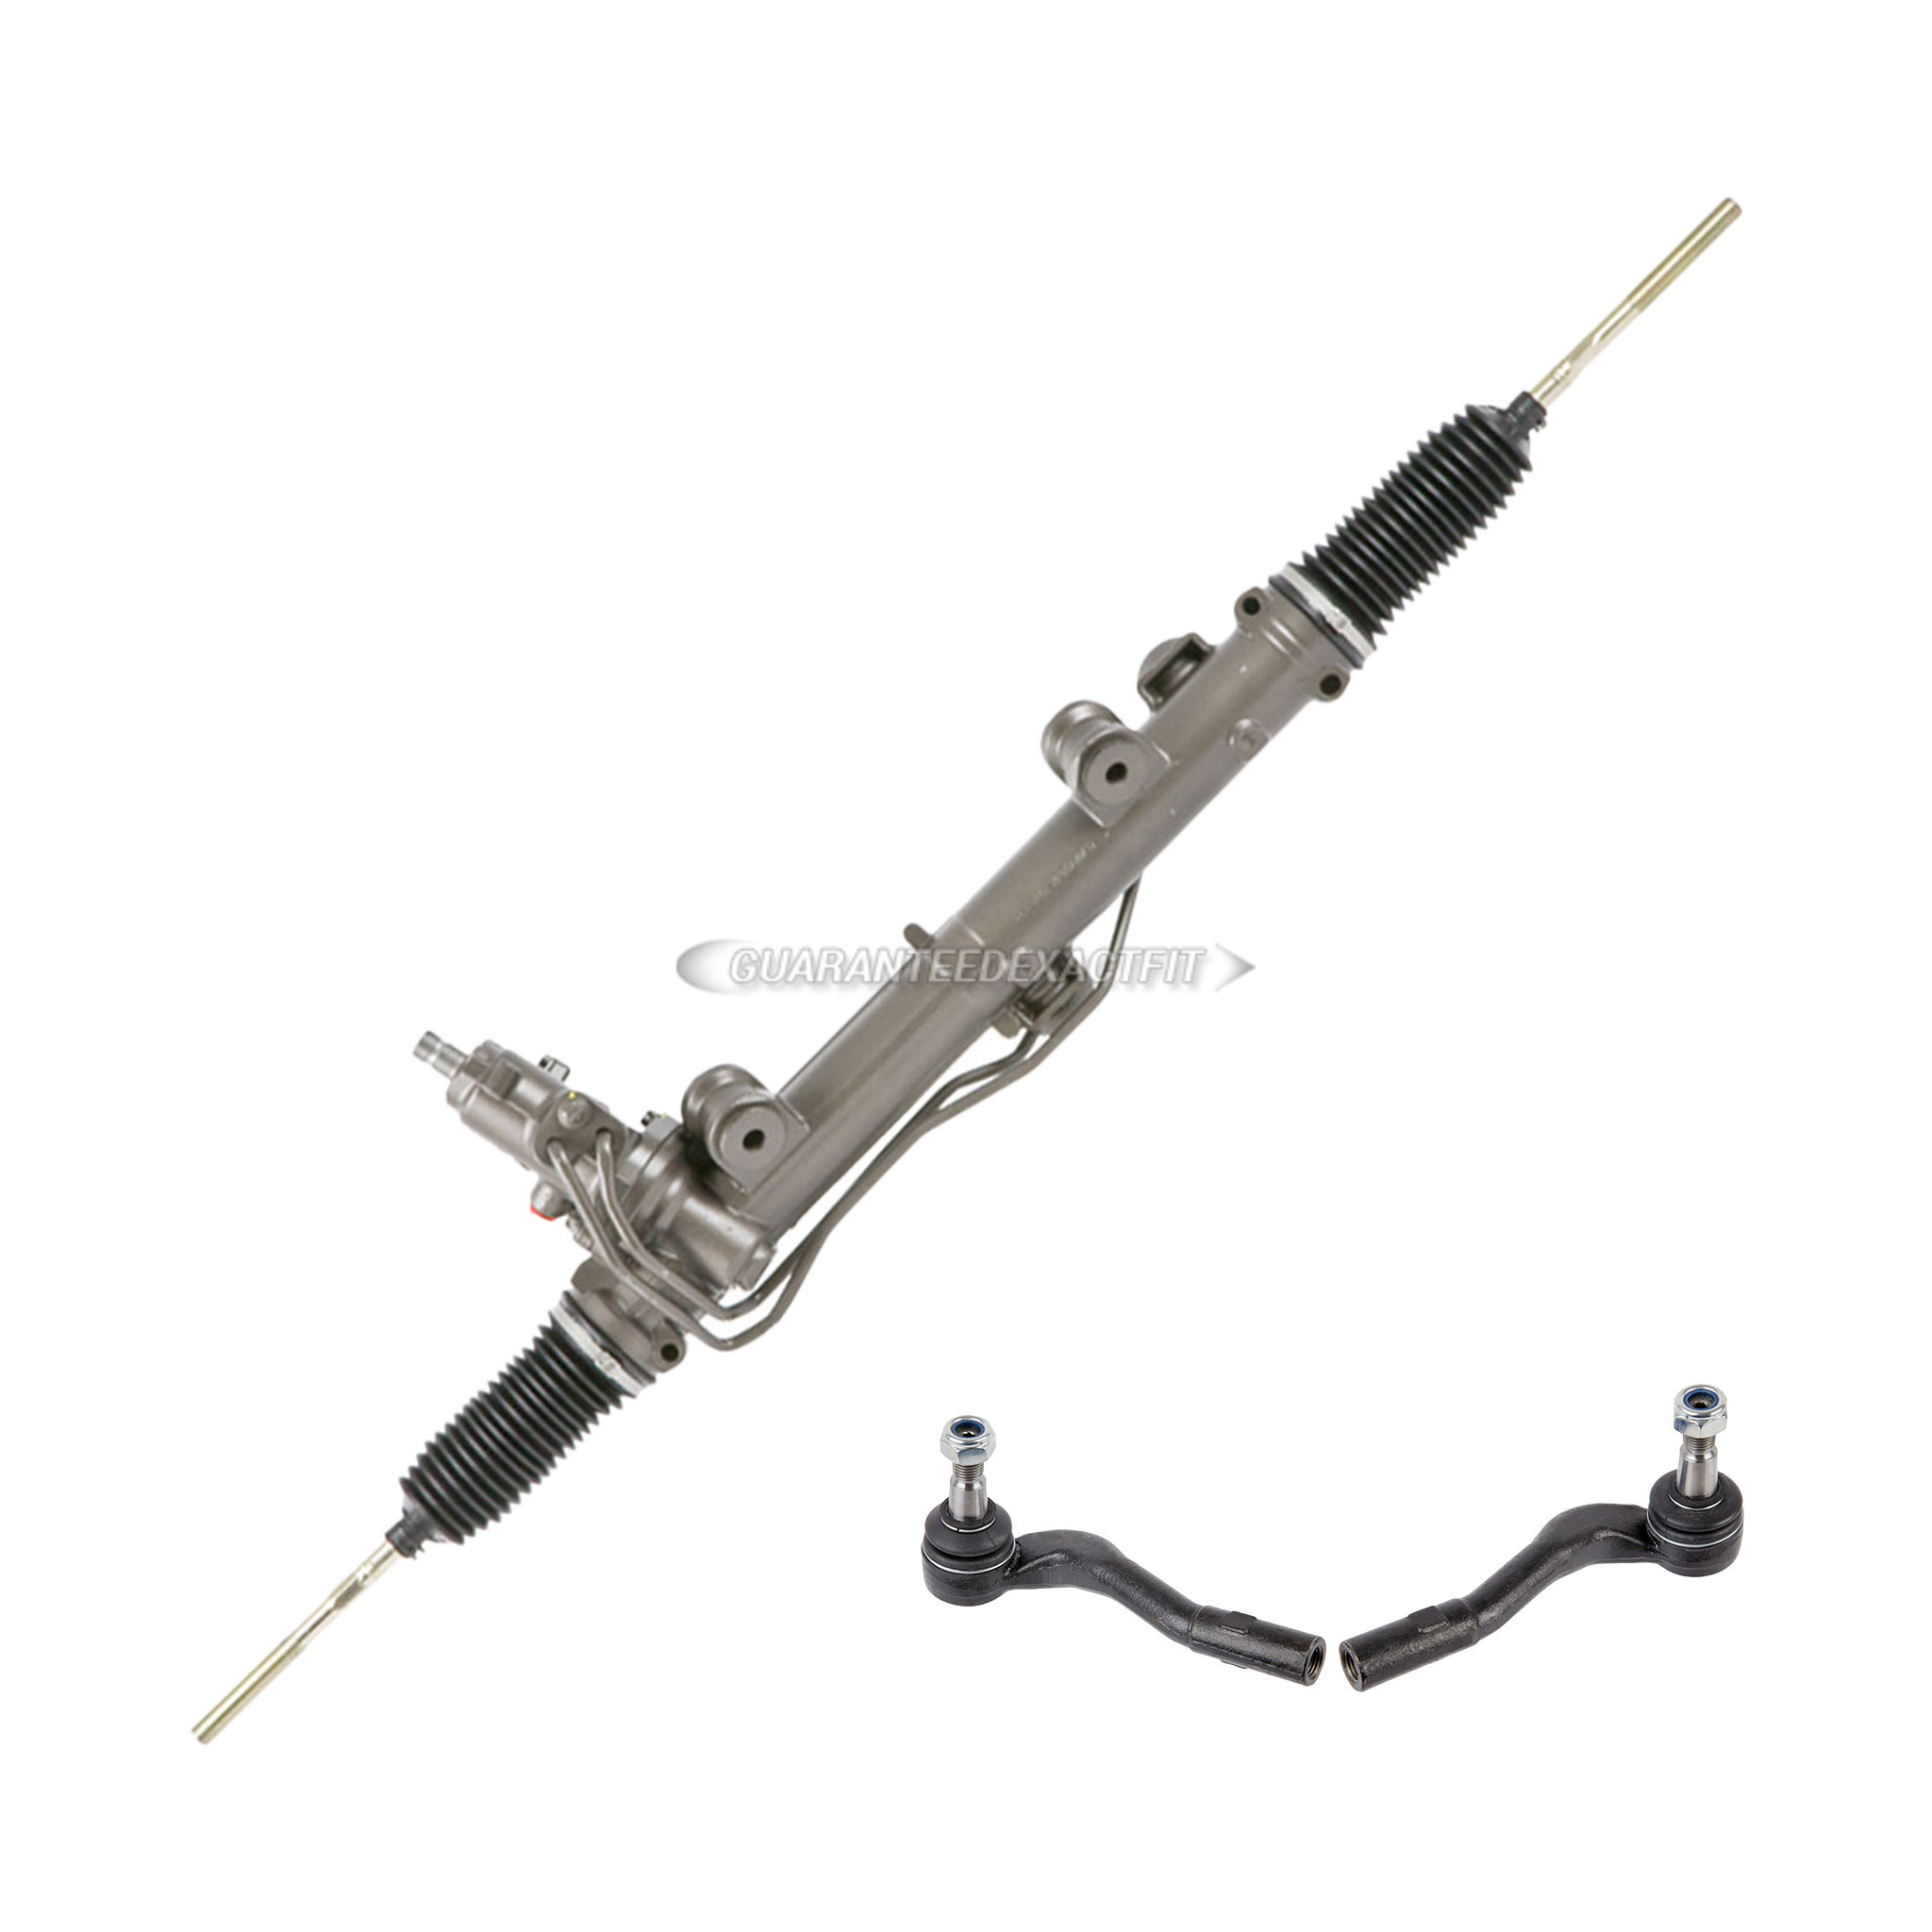  Mercedes Benz slk55 amg rack and pinion and outer tie rod kit 